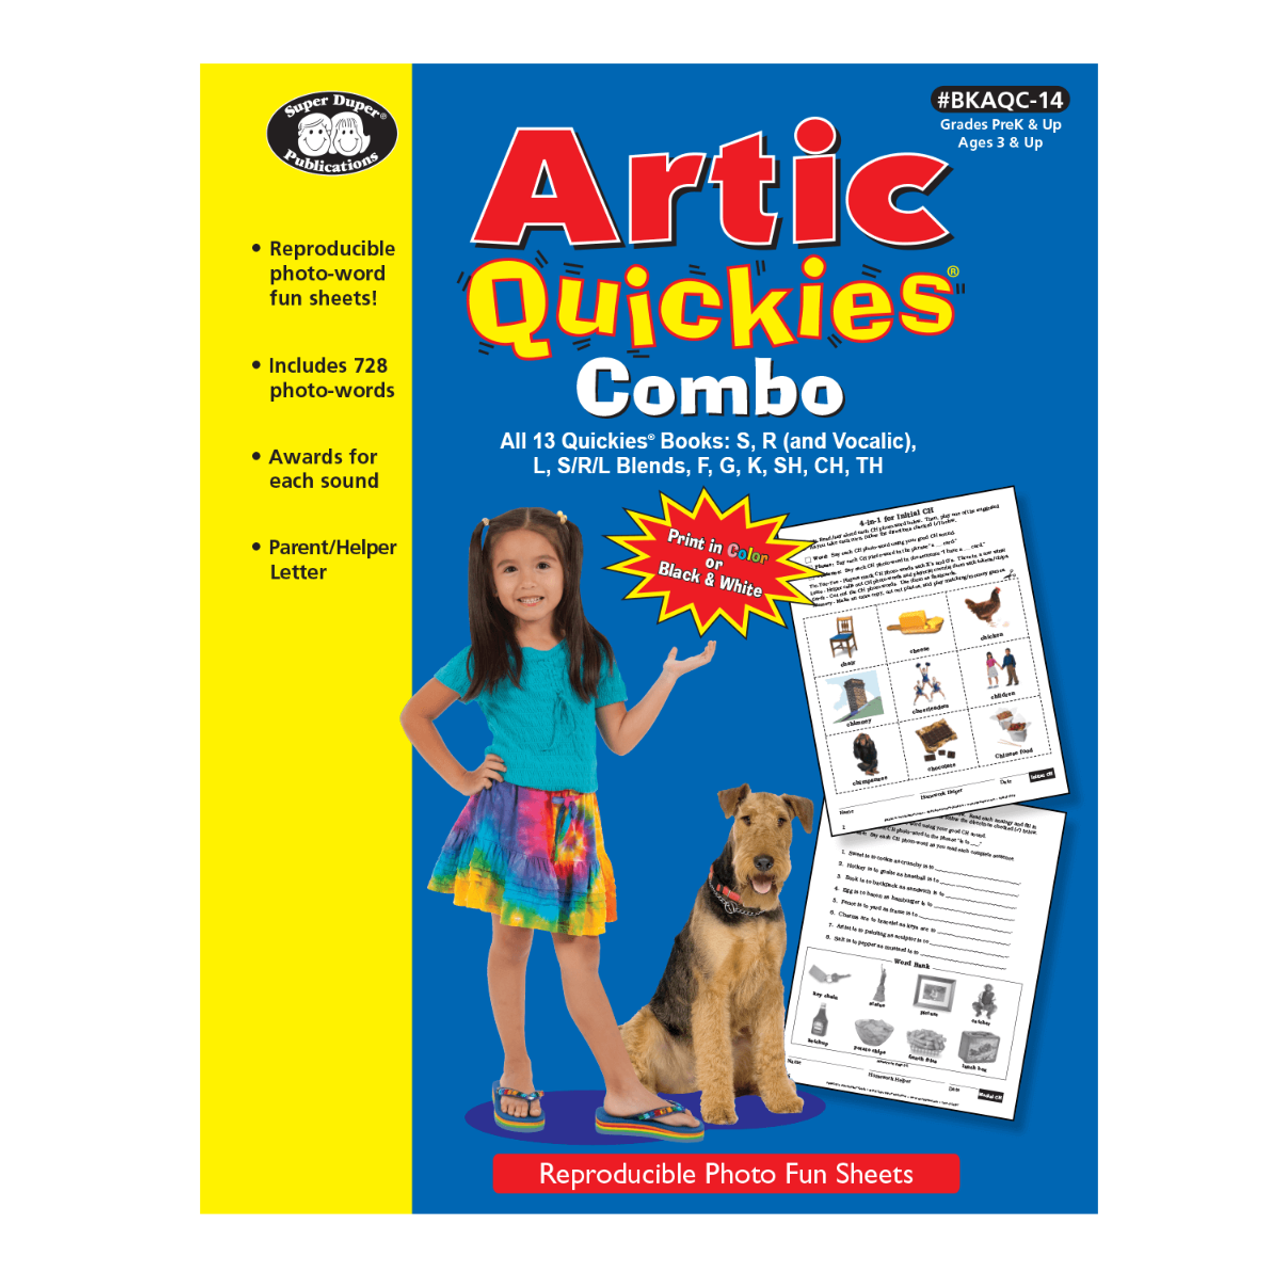 Artic Quickies Combo Fun Stuff Educational  Therapeutic Resources